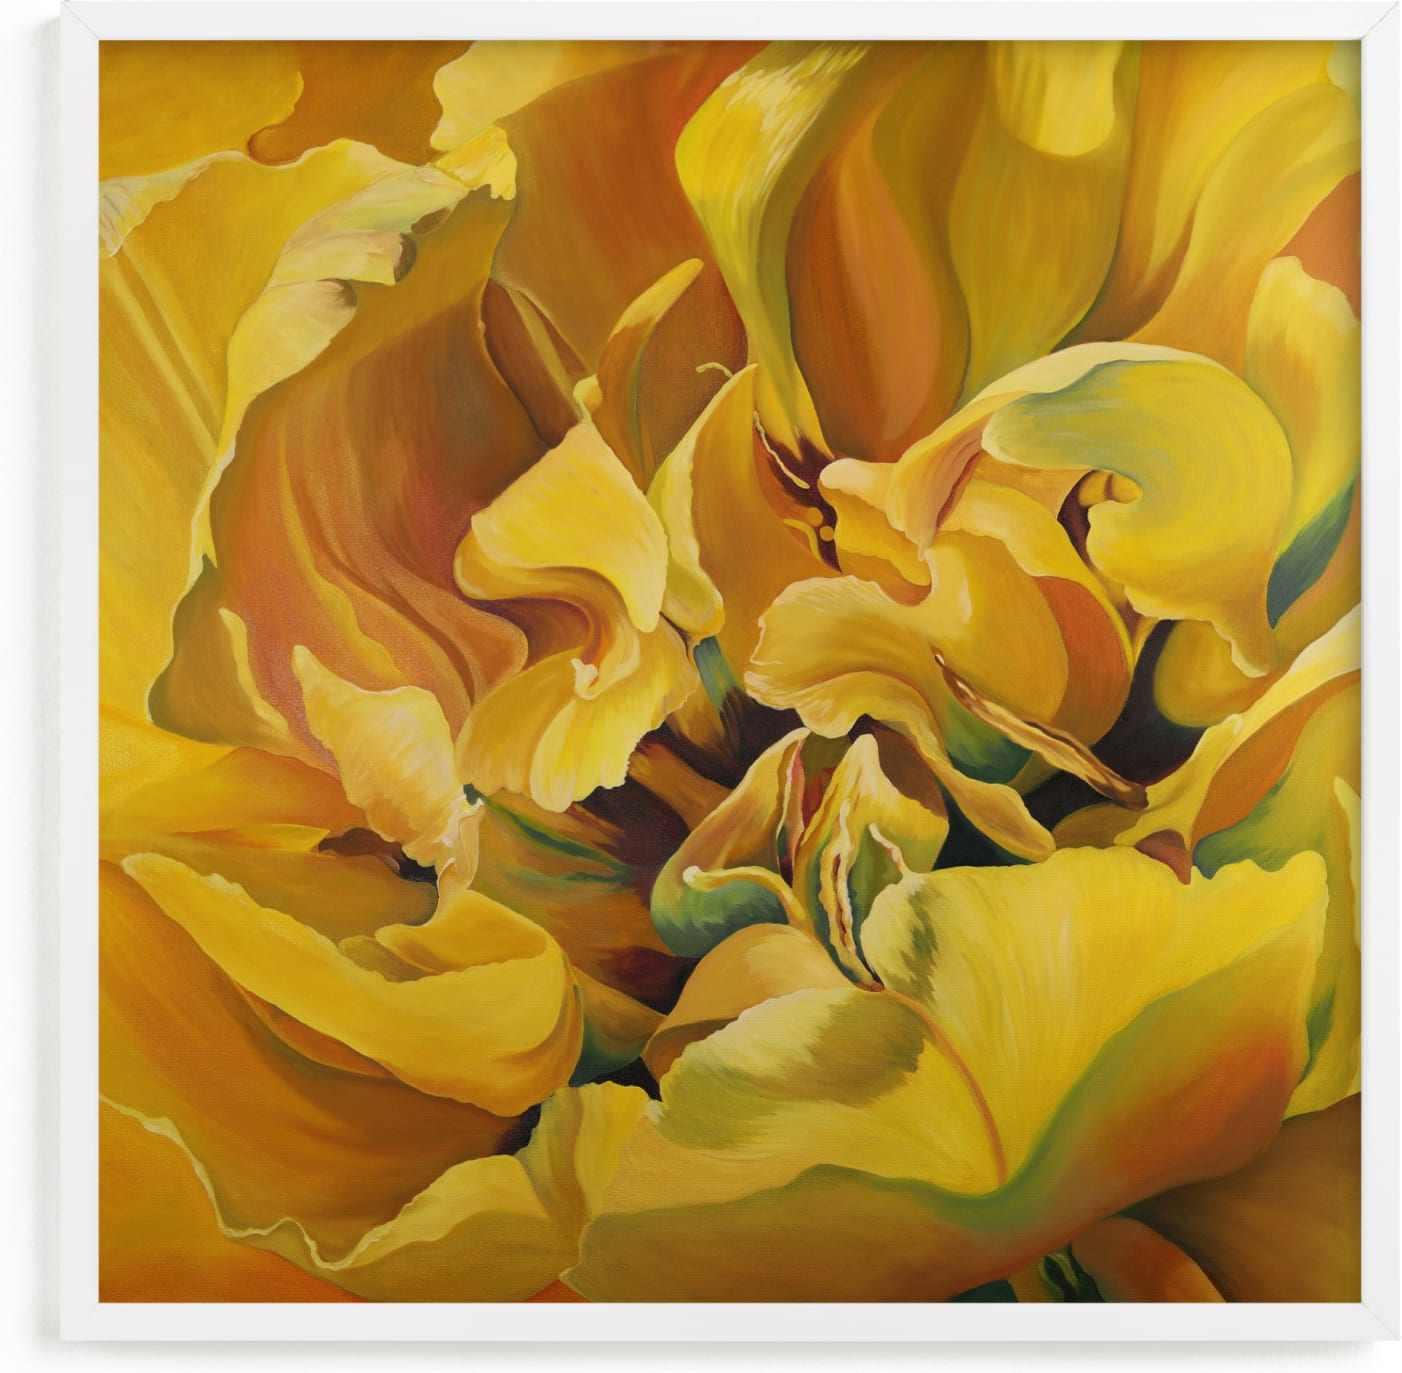 This is a yellow art by Mandy Trimble Leonard called Spring Dance.